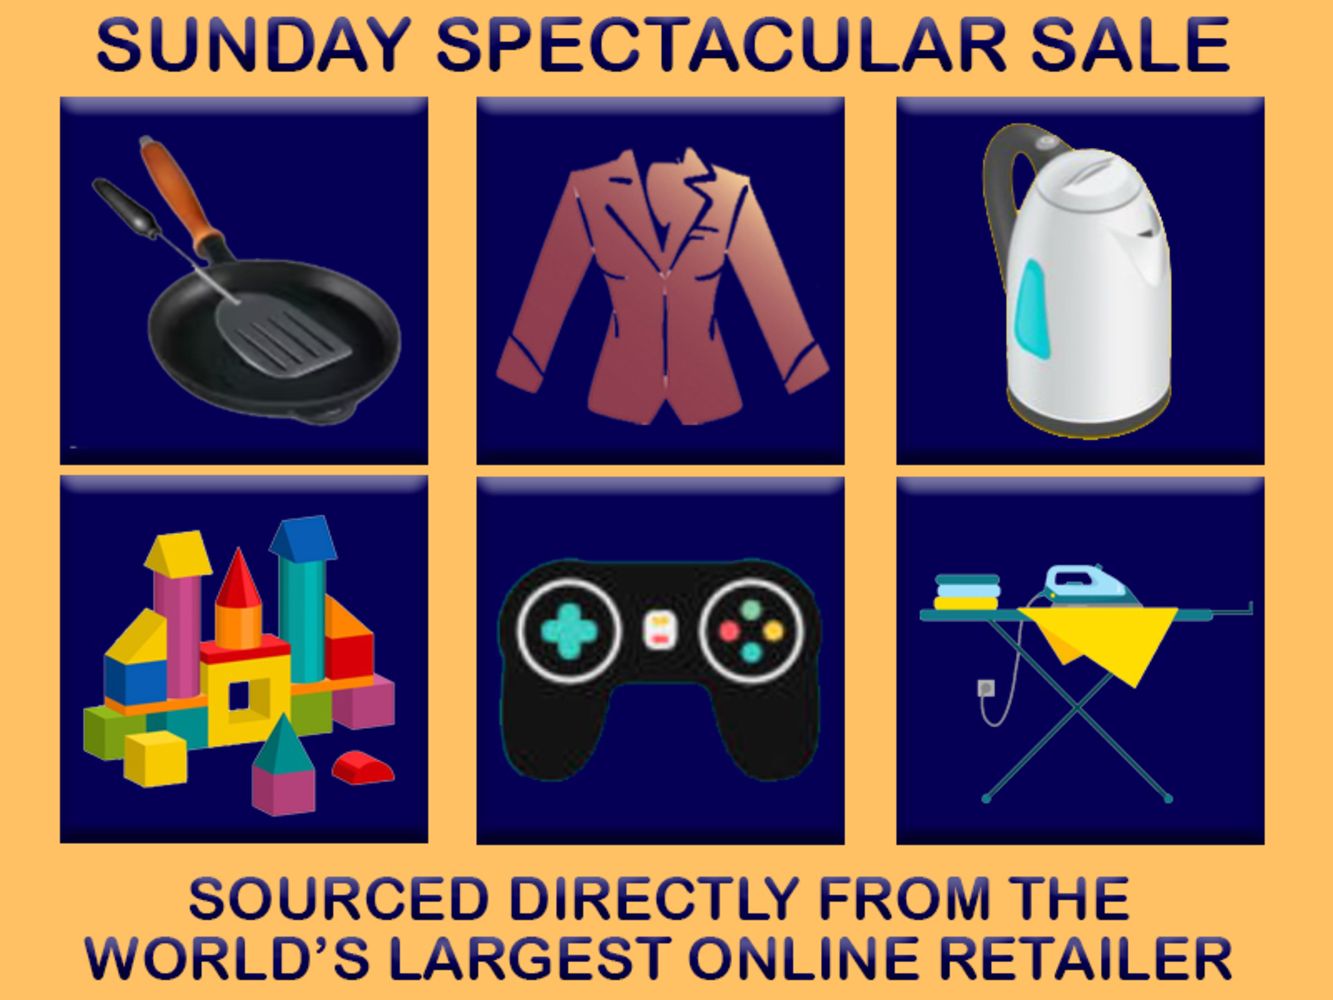 TIMED - Sunday Spectacular Sale: Brand-New Stock 14th August 2022